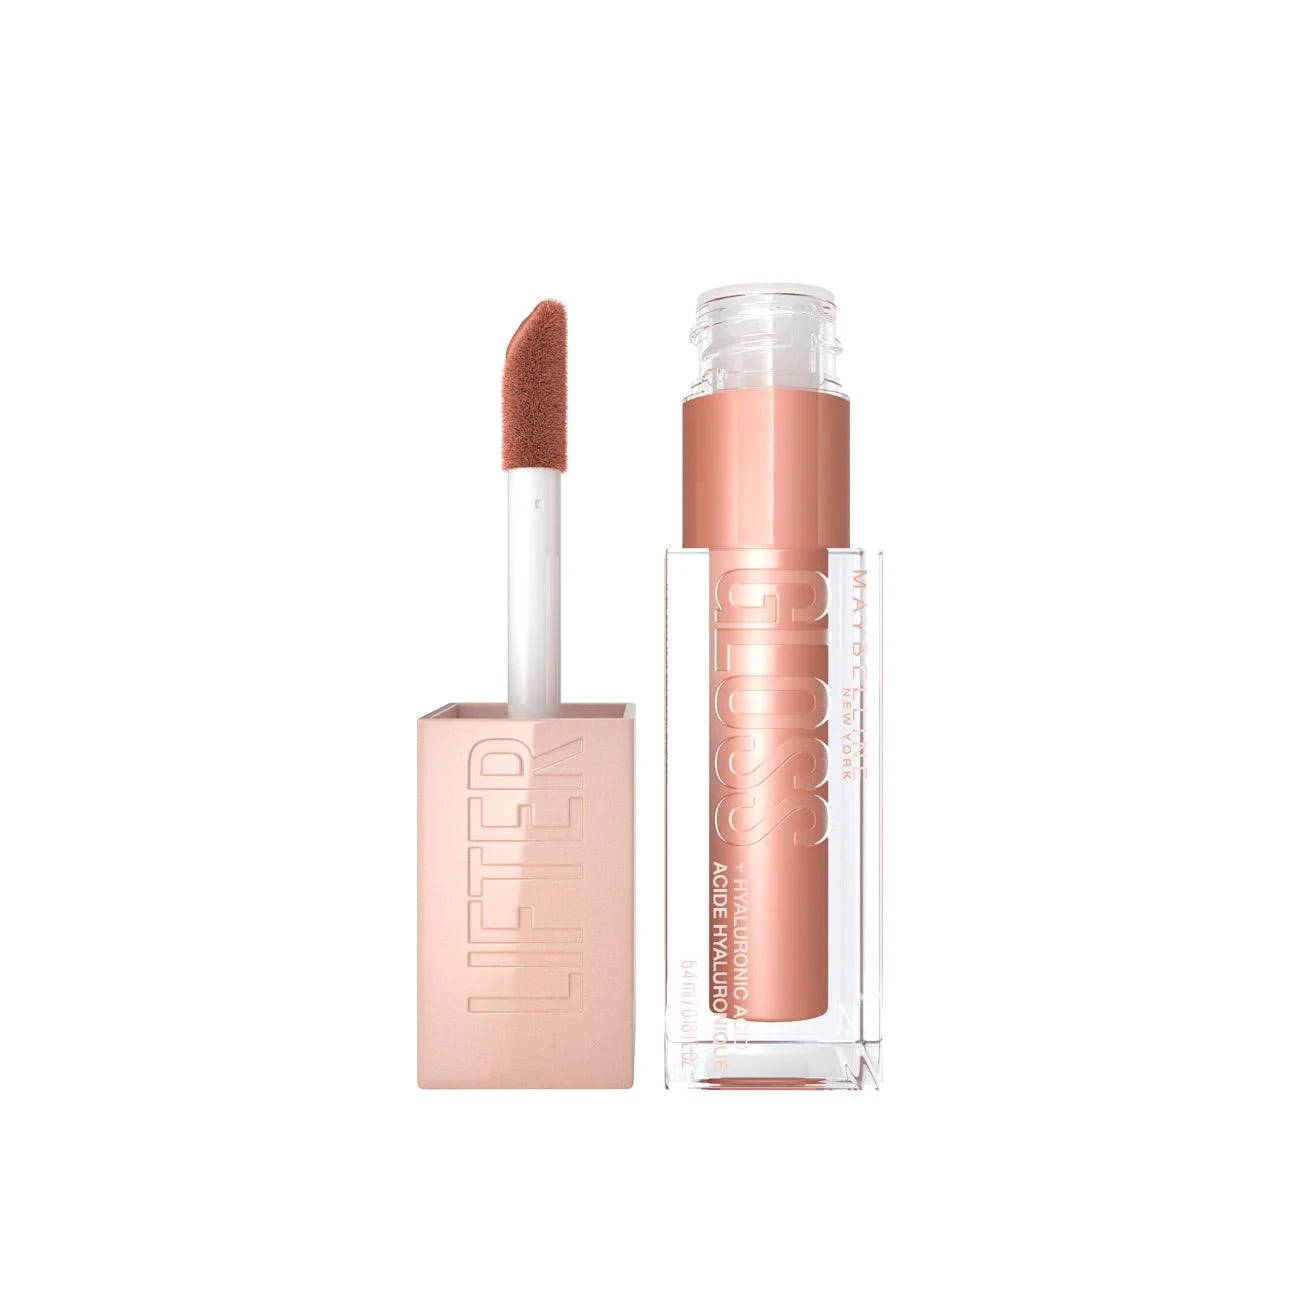 Maybelline - Lifter Gloss Lip Gloss Makeup With Hyaluronic Acid | 008 Stone